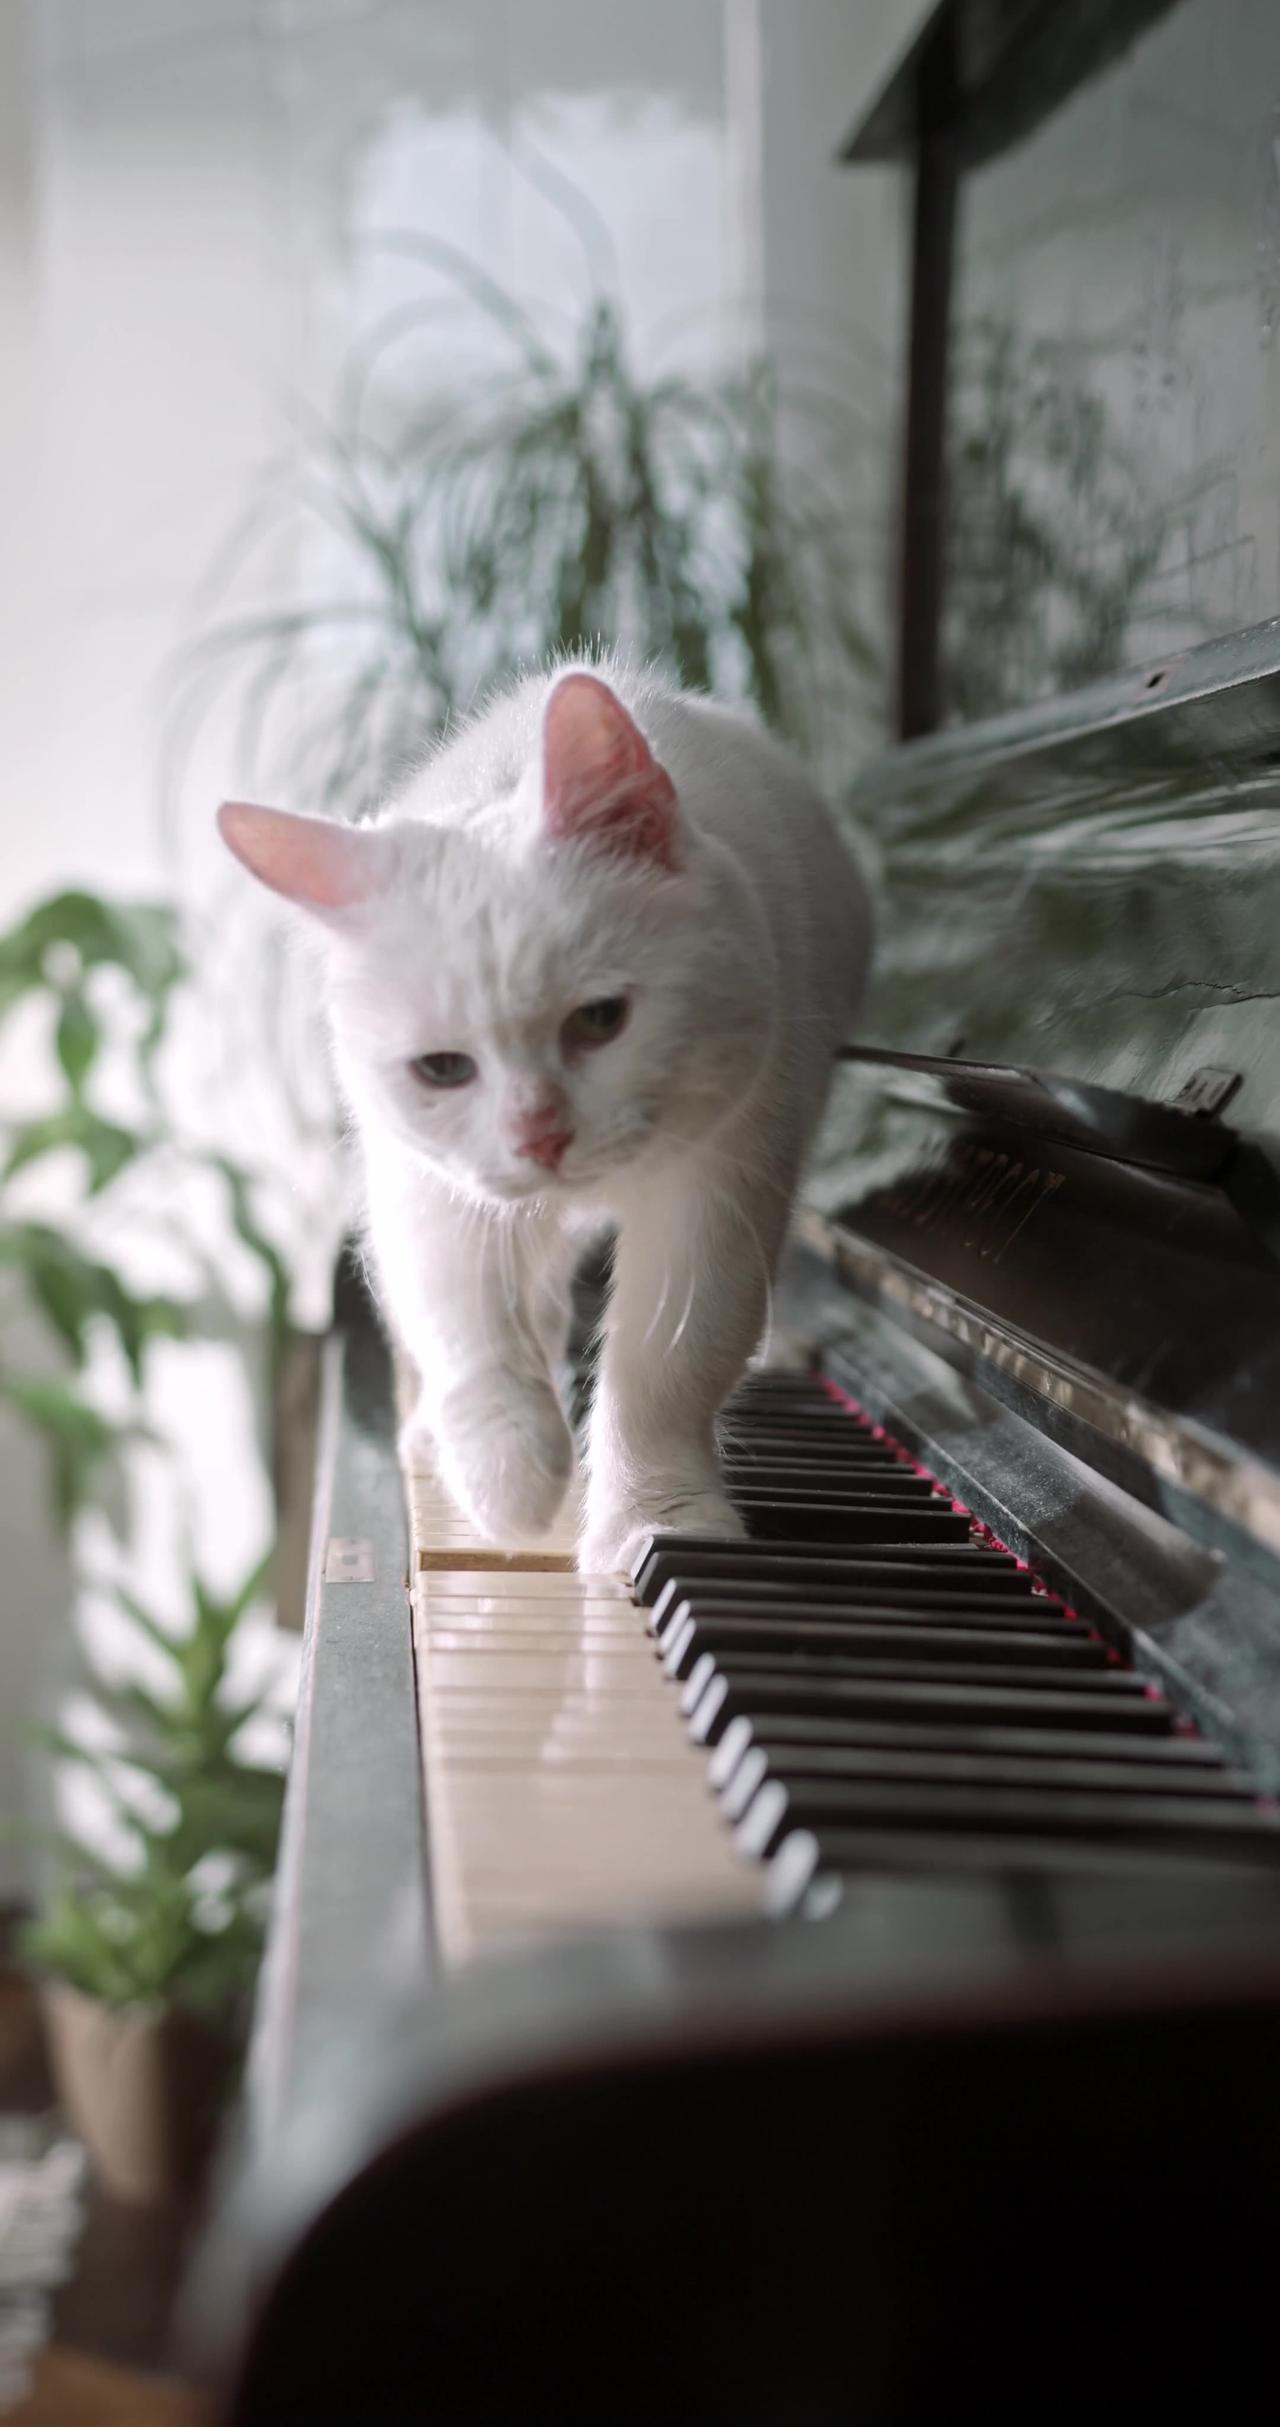 a-cat-walking-over-the-piano-keyboard